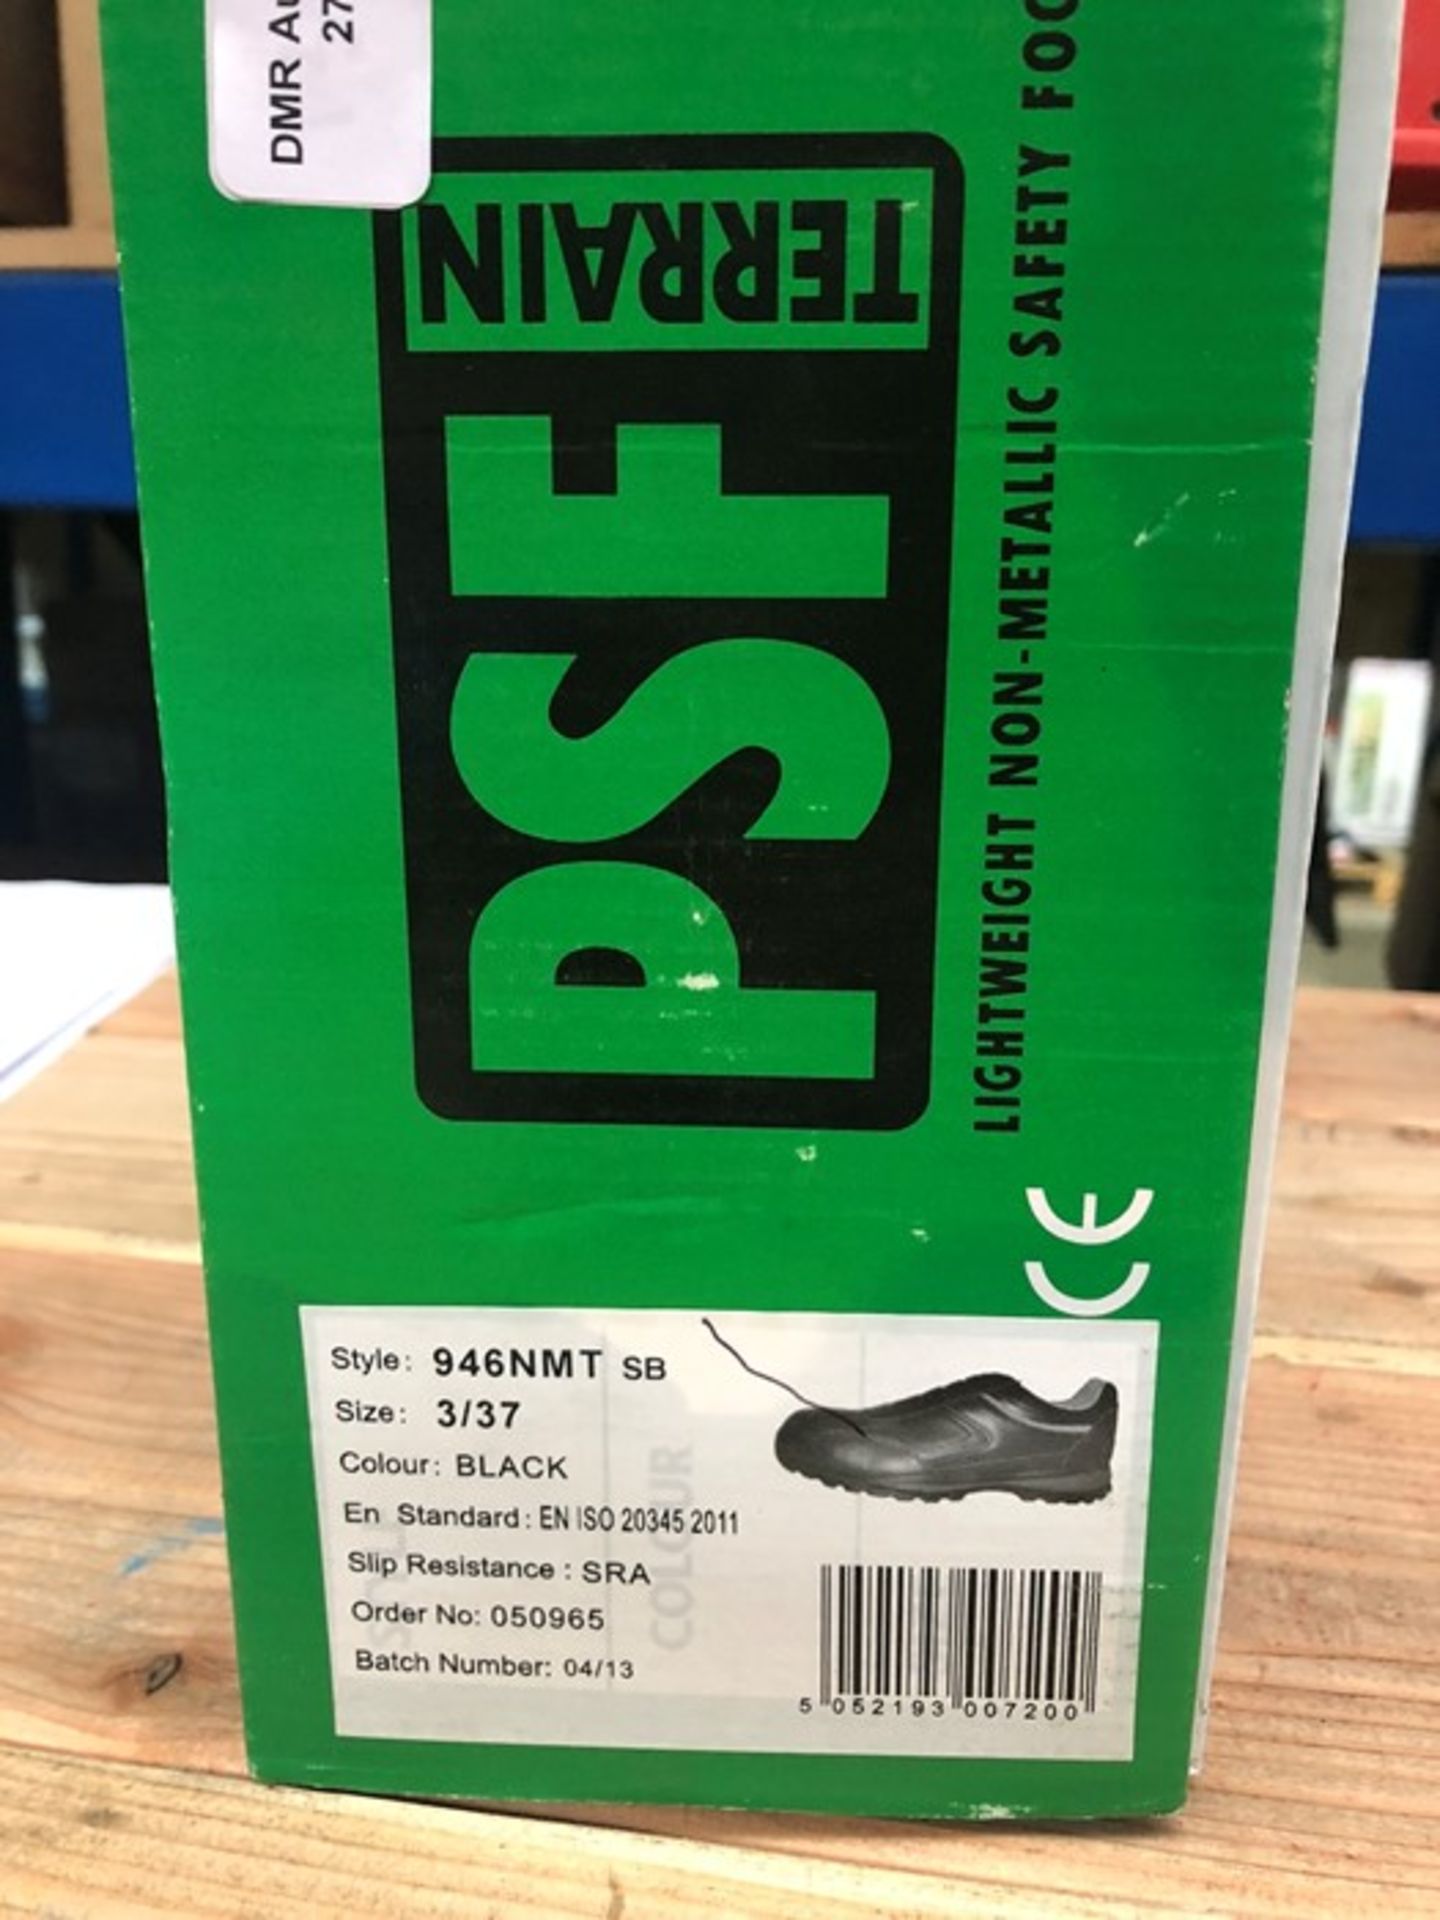 1 LOT TO CONTAIN 5 BOXED PAIRS OF LIGHTWEIGHT NON-METALLIC SAFETY FOOTWEAR IN BLACK / SIZE: 3 UK (